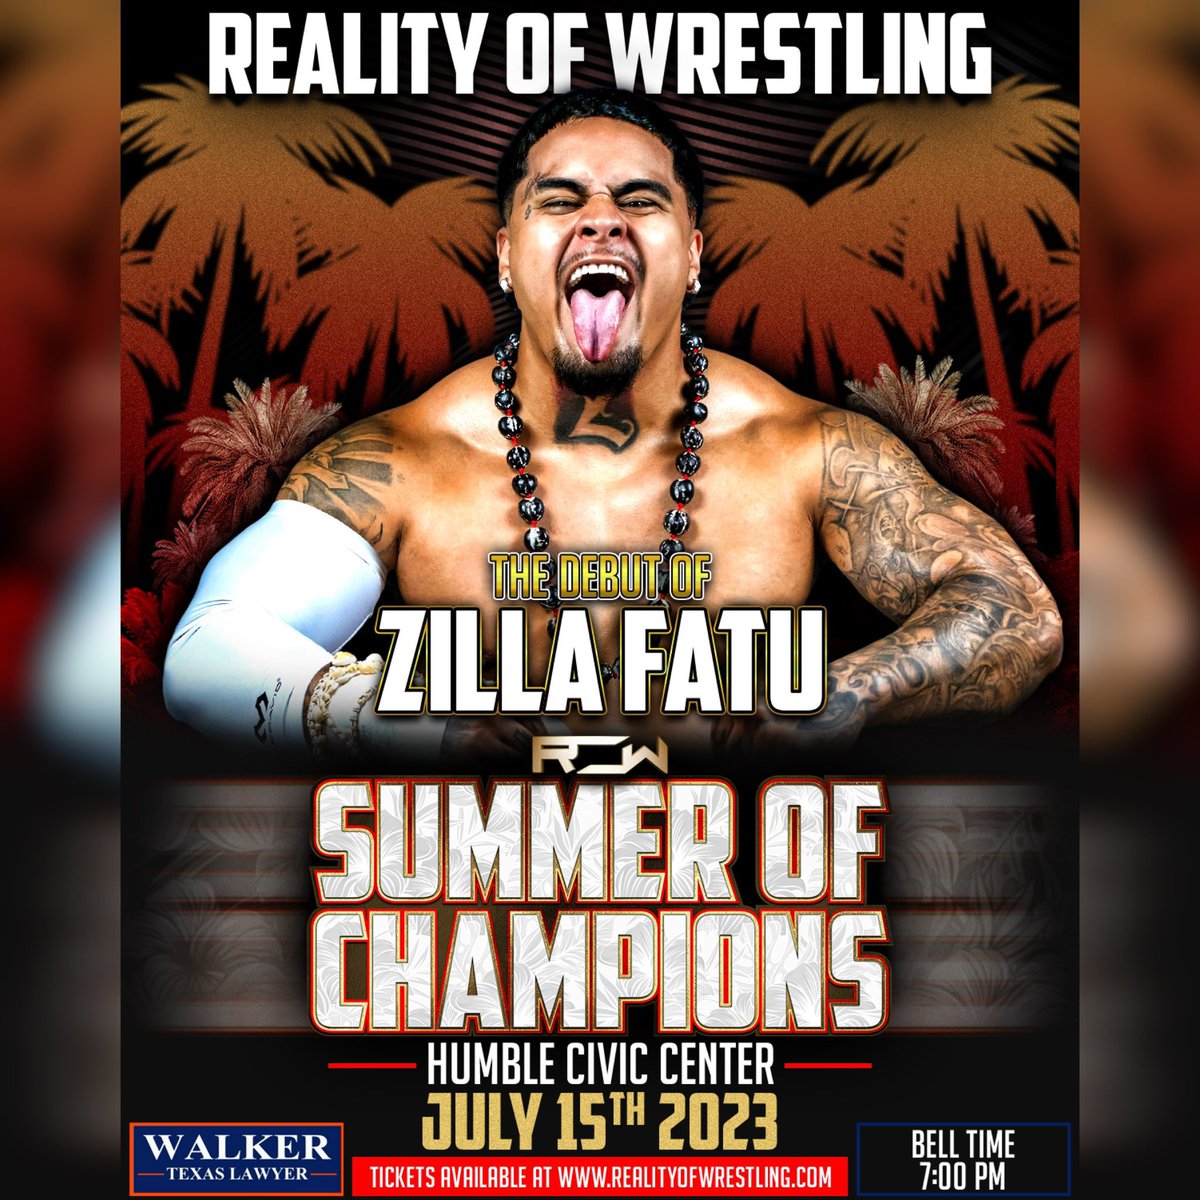 ‼️ The Debut of Zilla Fatu ‼️

Saturday, July 15th in Humble, Texas at the Humble Civic Center come see the must anticipated debut of @Zillafatu!!

#SummerOfChampionsIX #BloodLine #SamoanDynasty

8233 Will Clayton Pkwy
Humble, TX 77338

🎫 Tickets 🎫 
shorturl.at/disIV